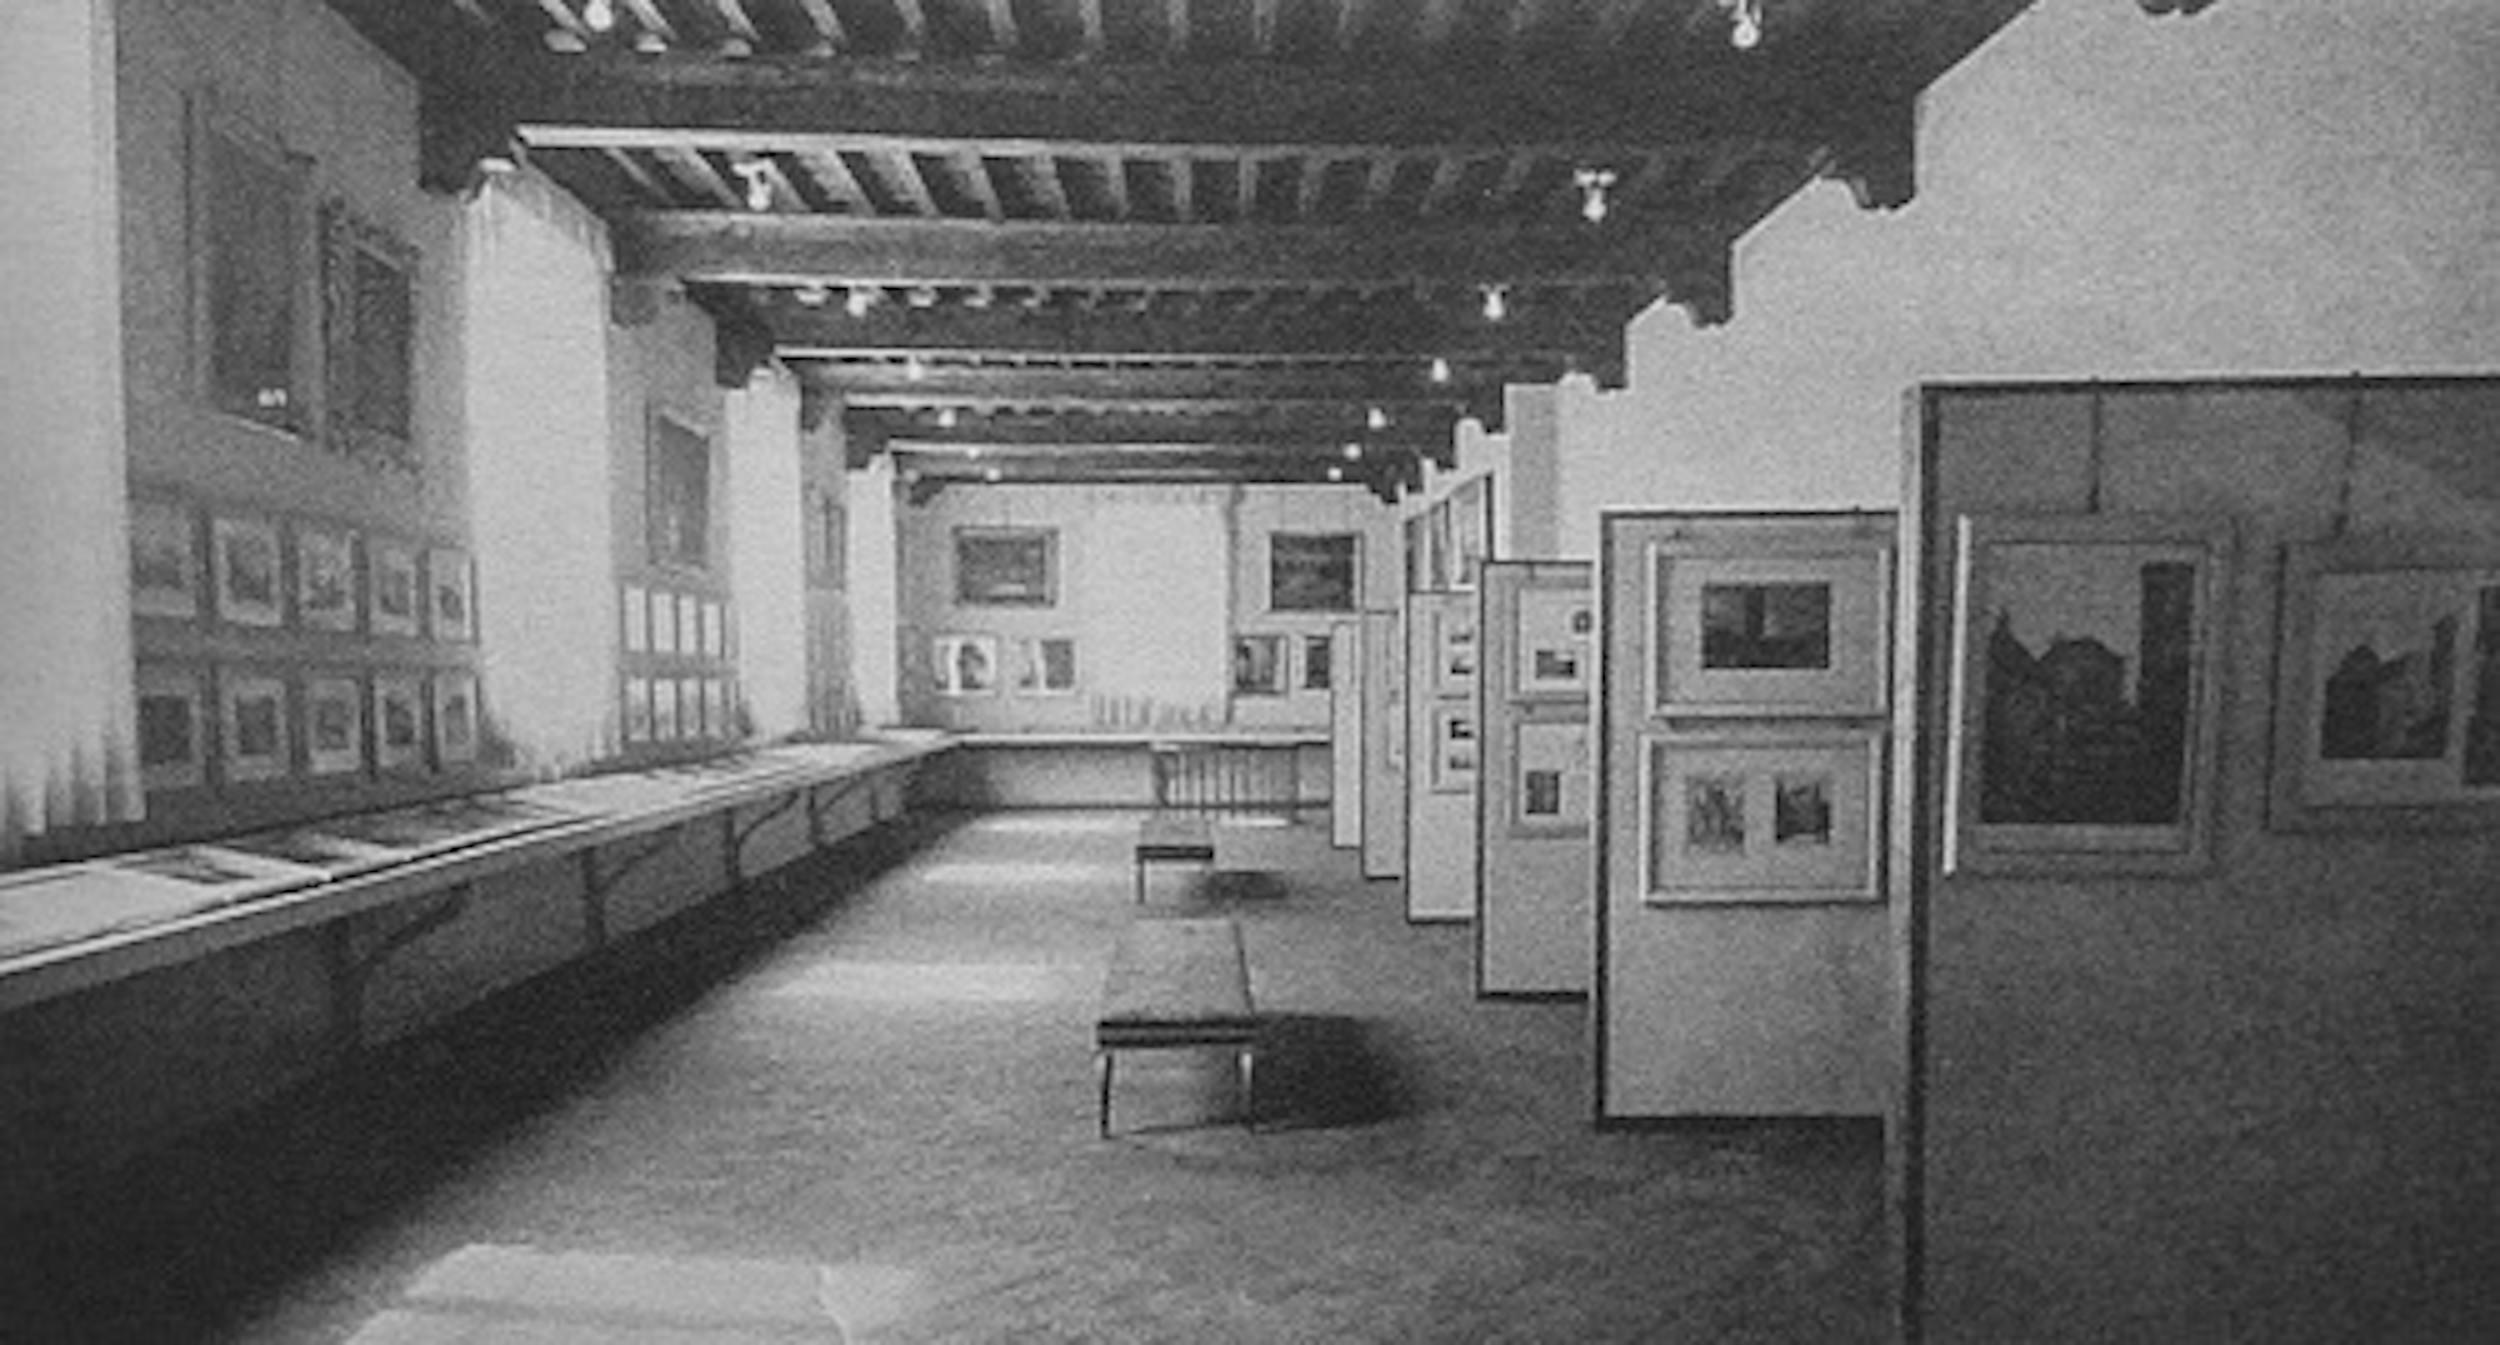 fig.3 il Museo di Firenze com’era, nell’allestimento al primo piano del Complesso delle Oblate, nel 1955 (tratto da  Lucchesi 2012, 121) - Museum of Florence as it was, set out on the first floor of the Oblate Complex, in 1955 (from:  Lucchesi 2012, 121).